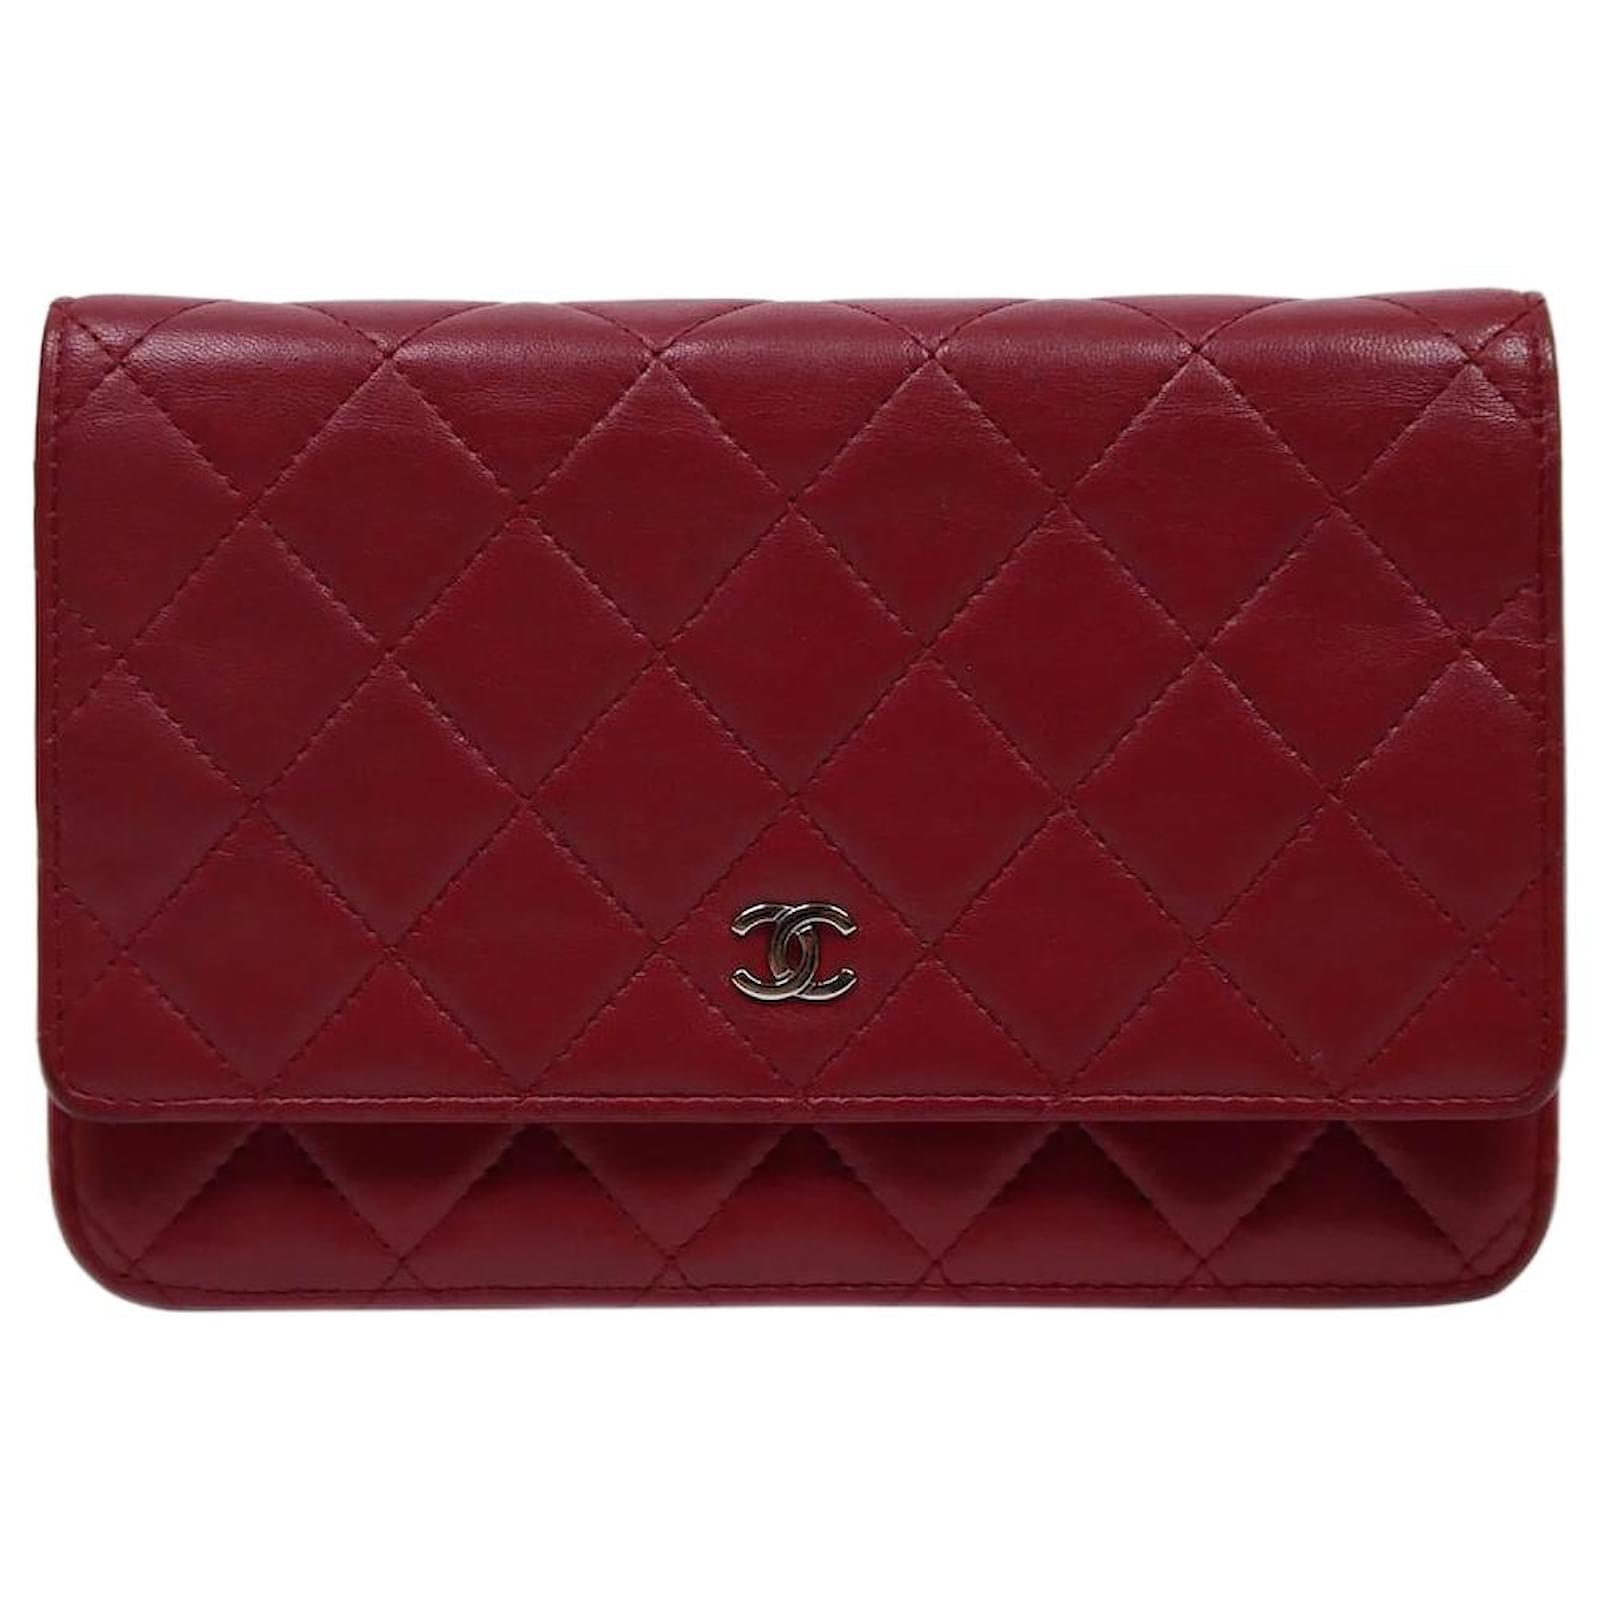 Authentic CHANEL Lambskin WOC in Red with Silver HW Crossbody Handbag